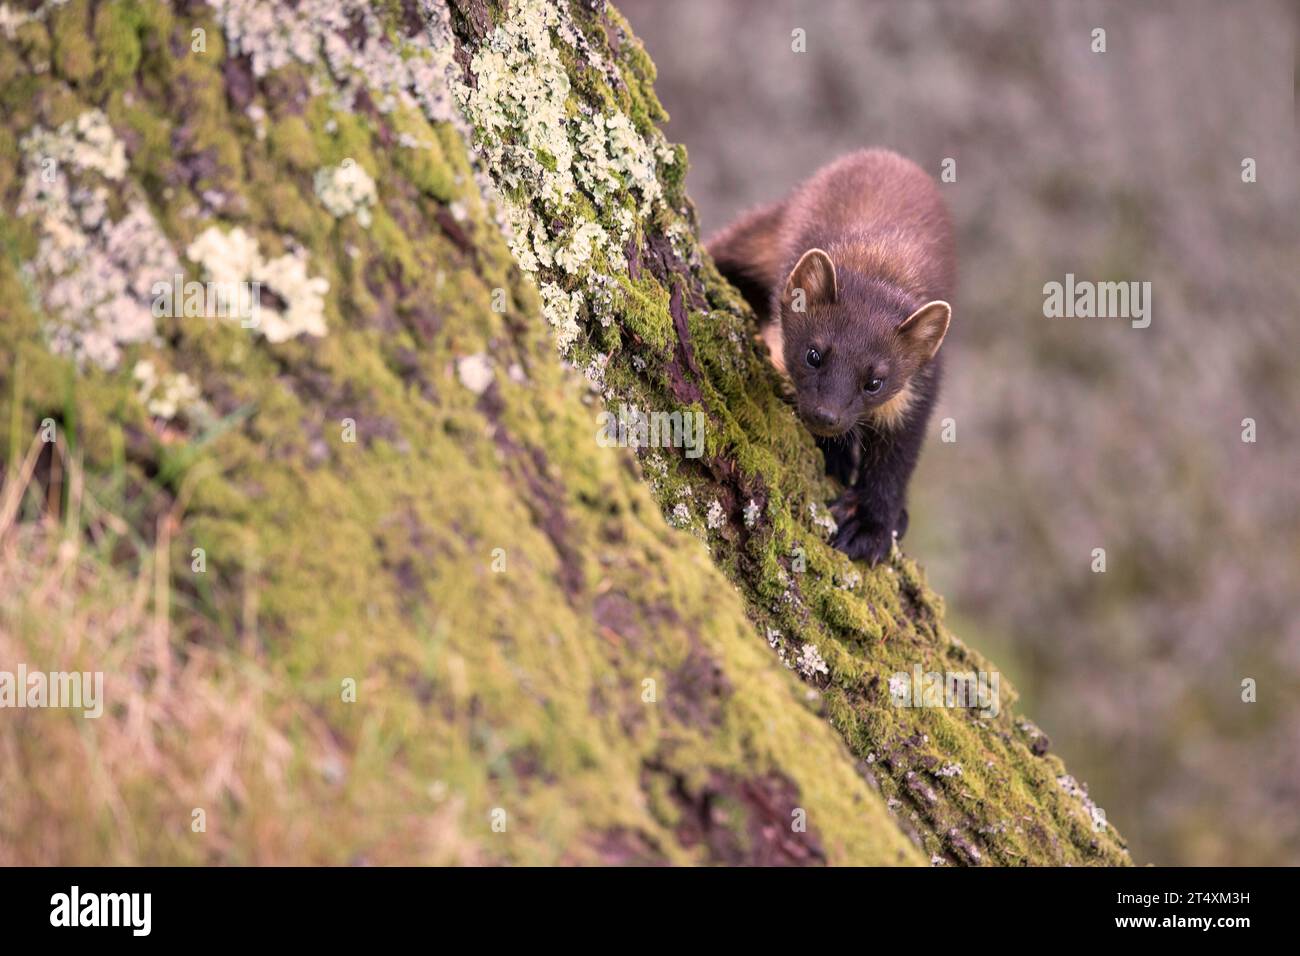 Pine marten peek-a-boo SCOTLAND TOUCHING images of two adorable British pine martens show one of them affectionately showering its mate with kisses. Stock Photo